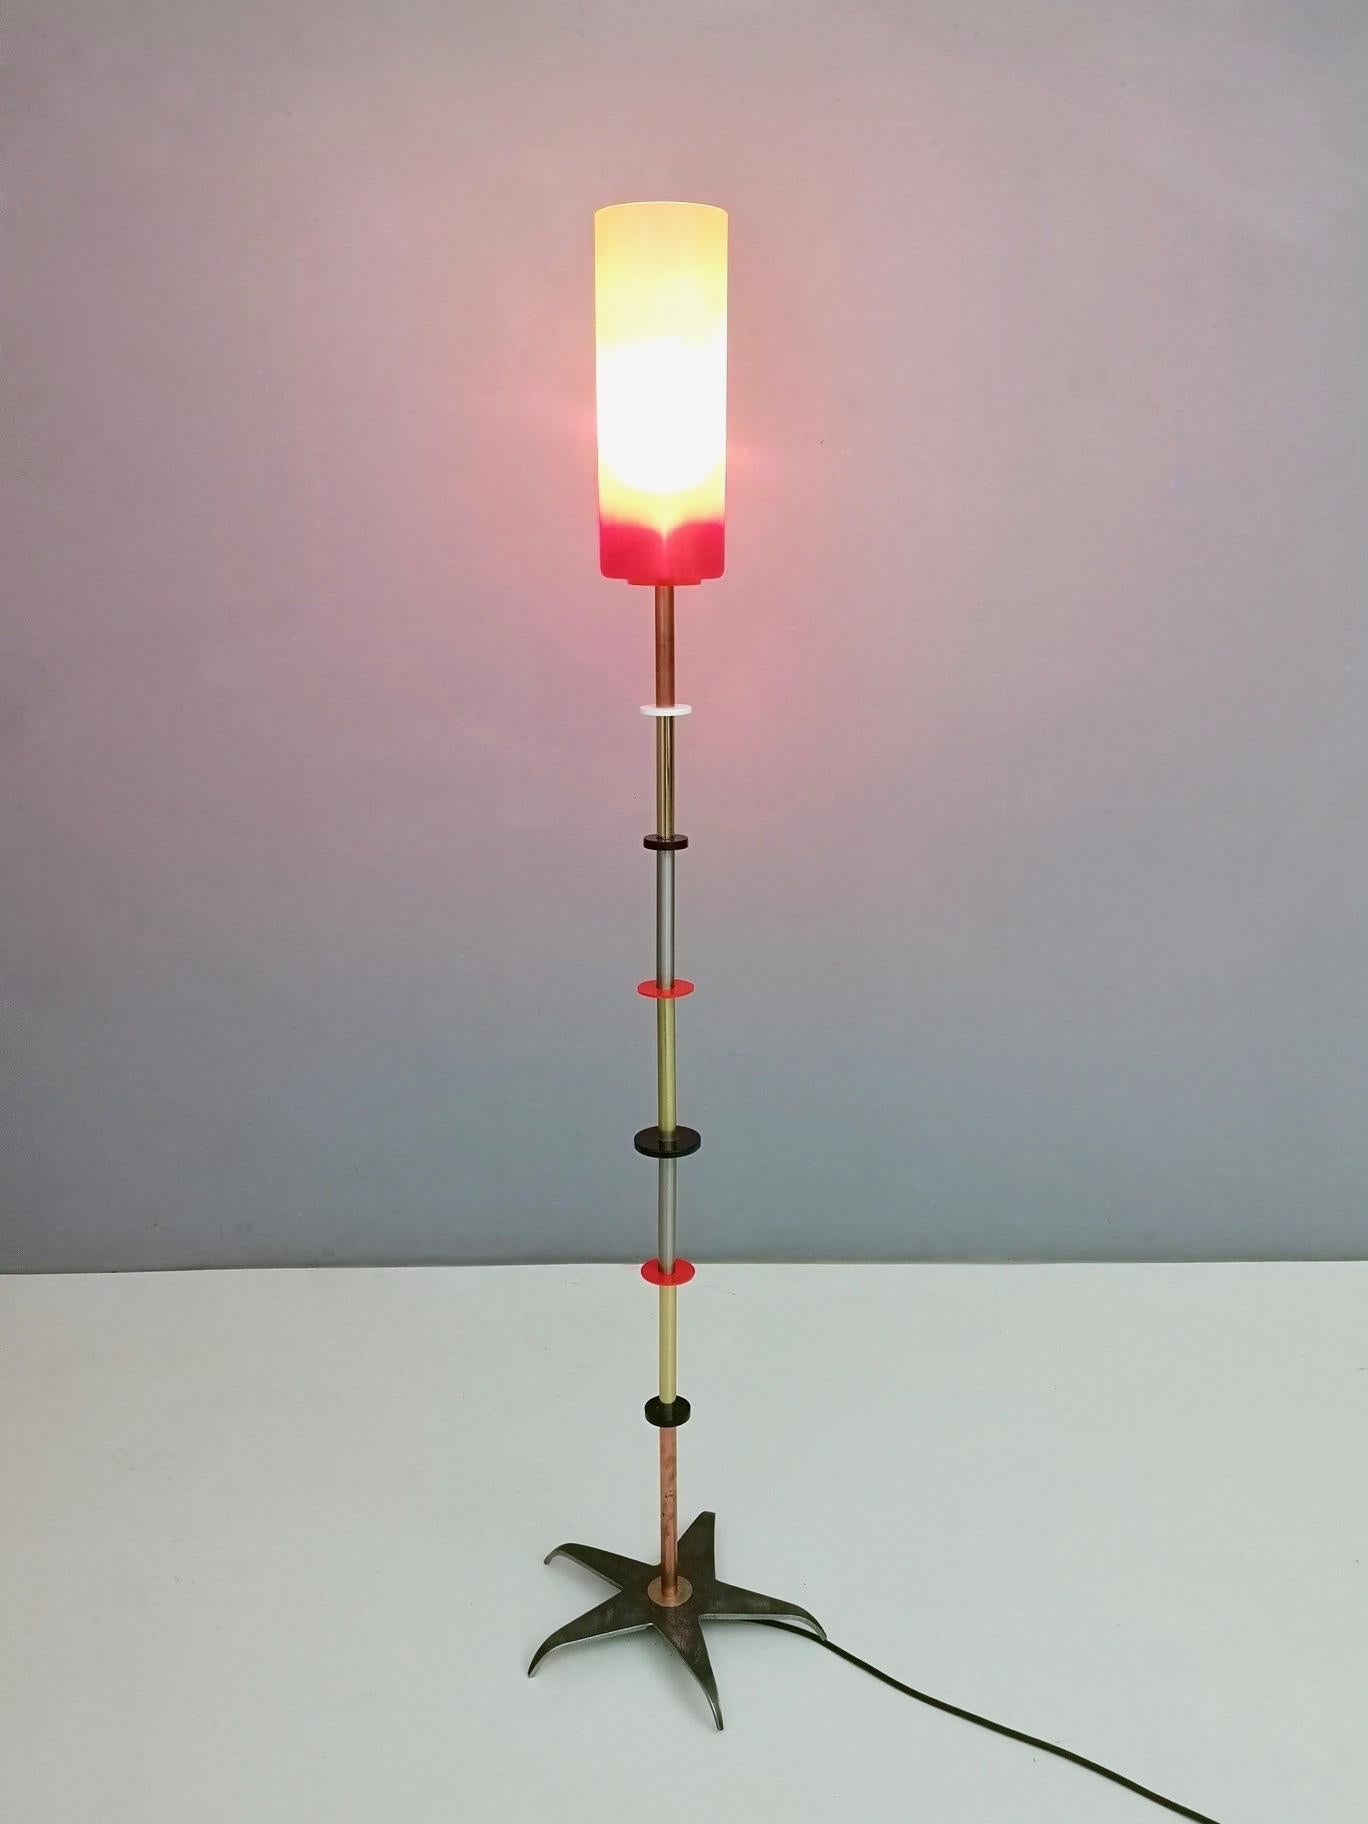 This floor lamp is made in brass, copper, plexiglass and chrome-plated metal and features a red and yellow colored glass lampshade that has a satin finish.
It is in mint condition and ready to give ambiance to any room.

